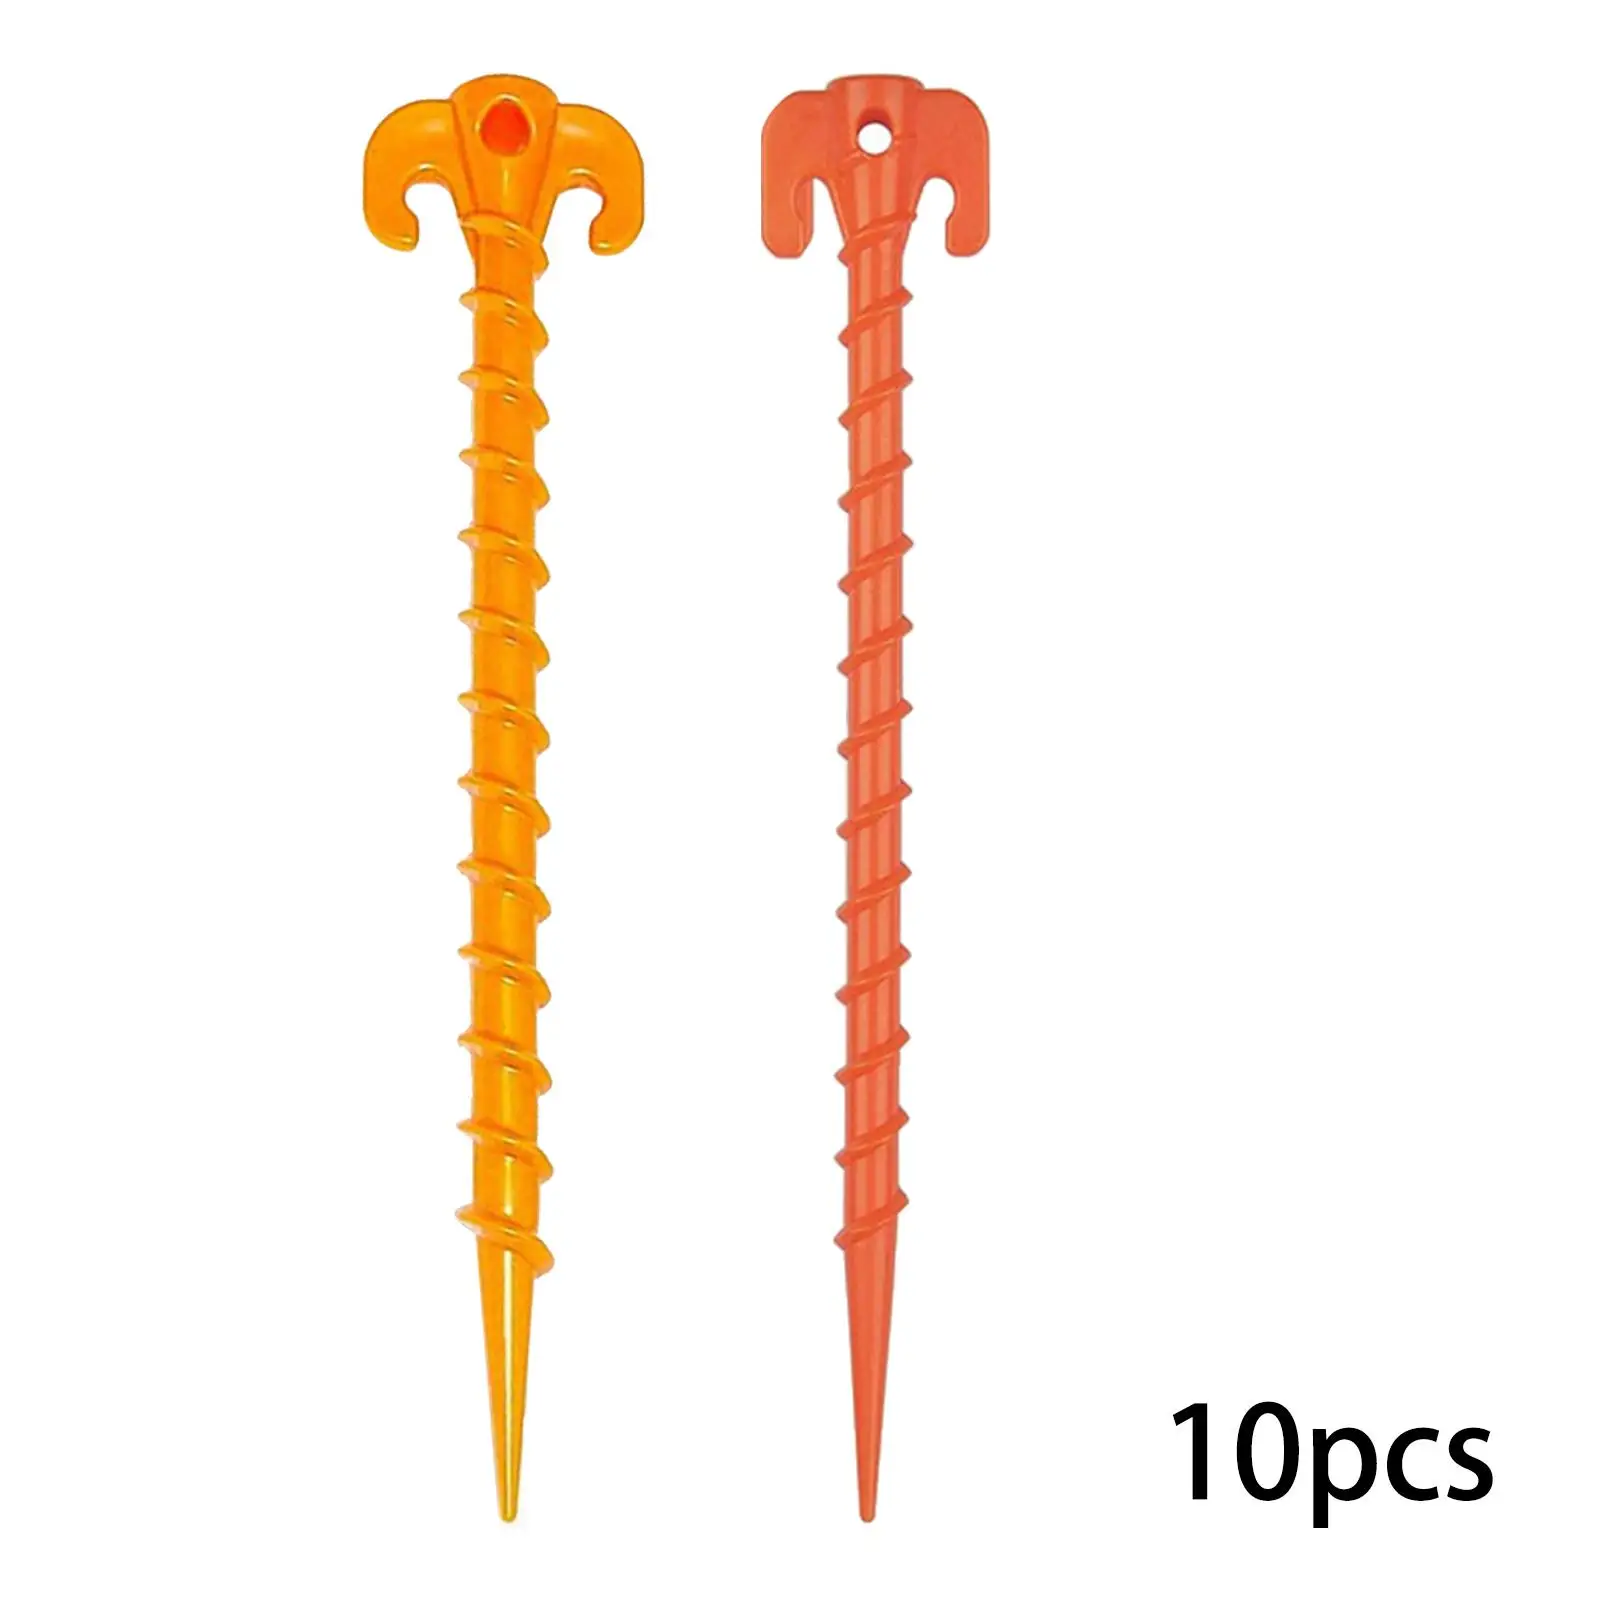 

10Pcs Tent Stakes Pegs Tarp Tent Peg Stakes Garden Stakes Ground Pegs for Backyard Backpacking Gardening Hiking Tent Accessories